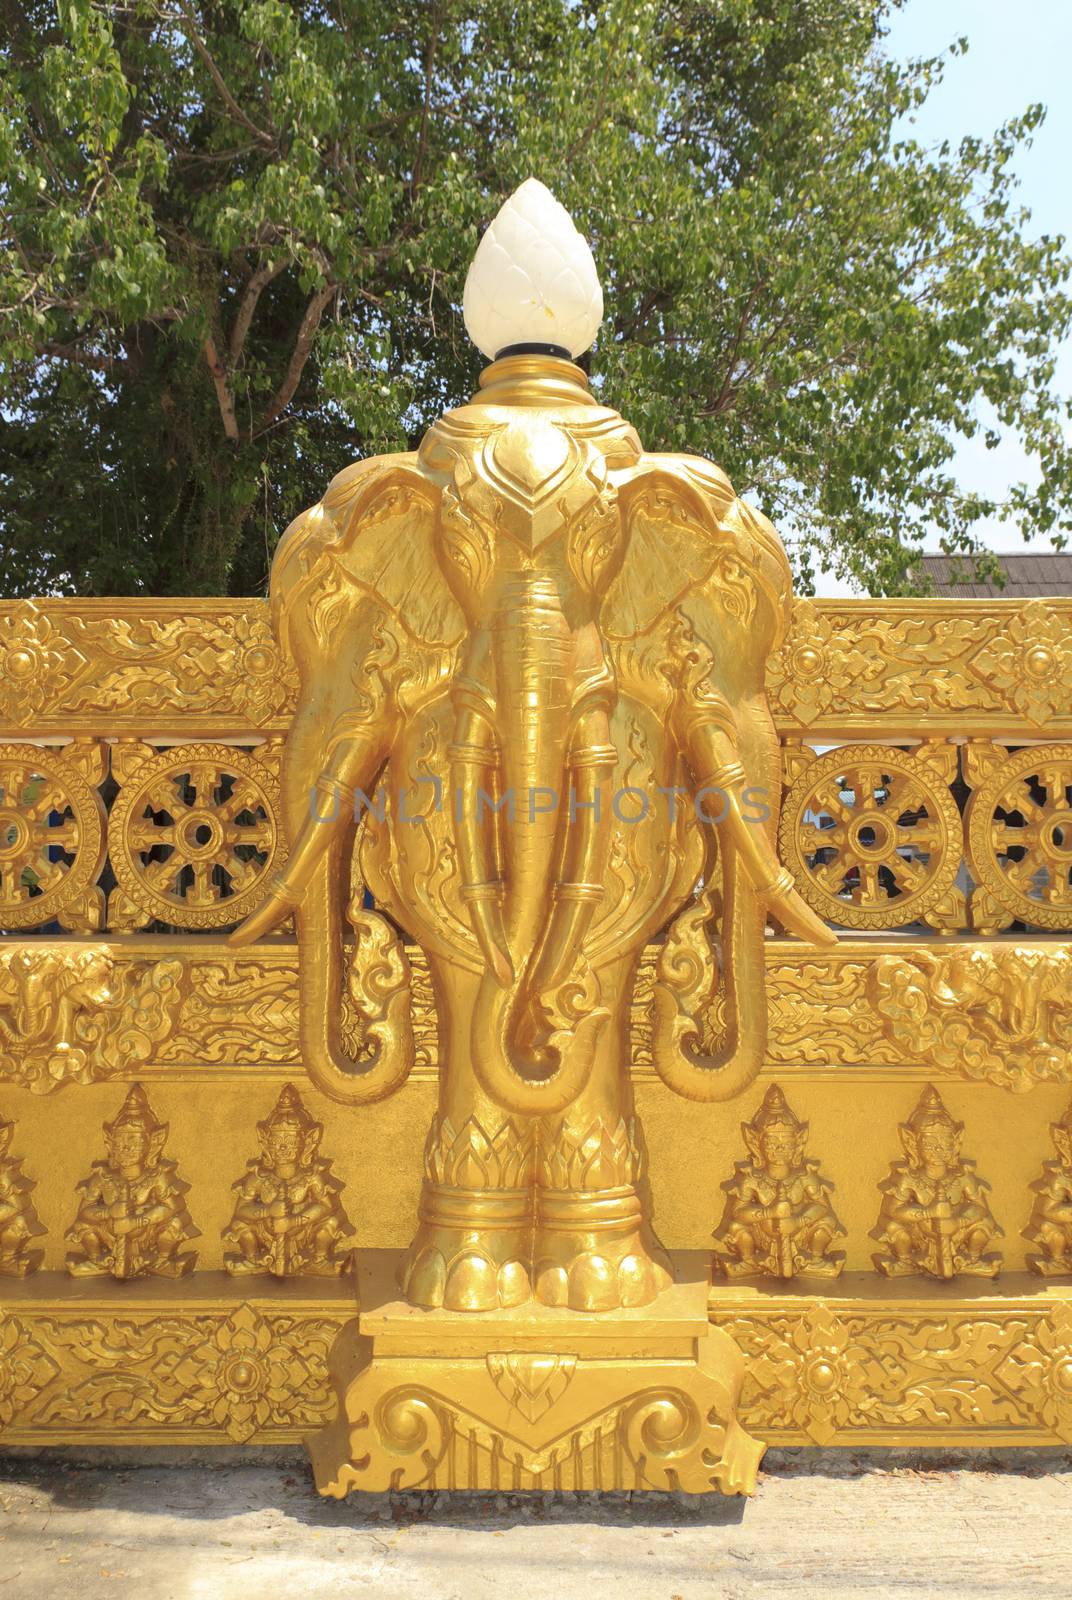 Thai elephant statues at Wat Paknam Joelo in Chachoengsao province at thailand.